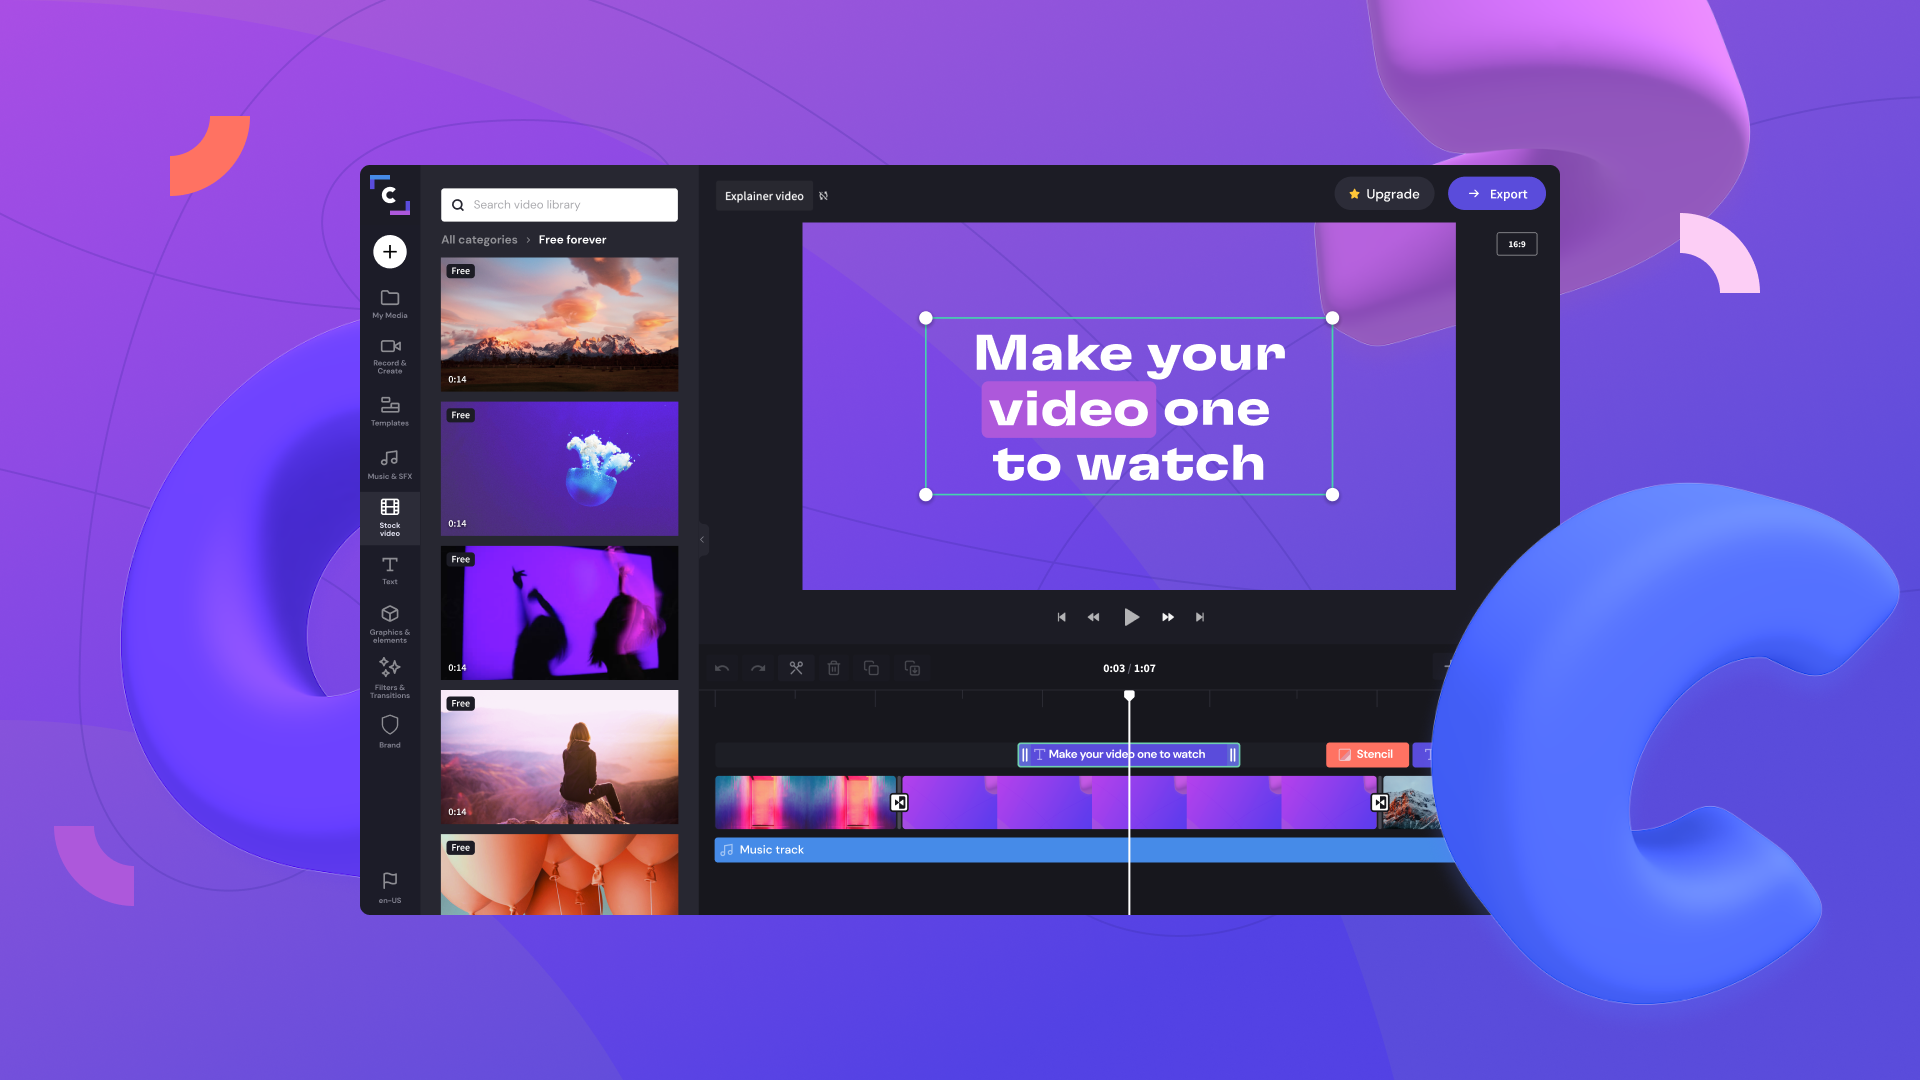 A screenshot of the Clipchamp app sits on a colorful background. The video being editing in the Clipchamp app includes the text "Make your video one to watch".